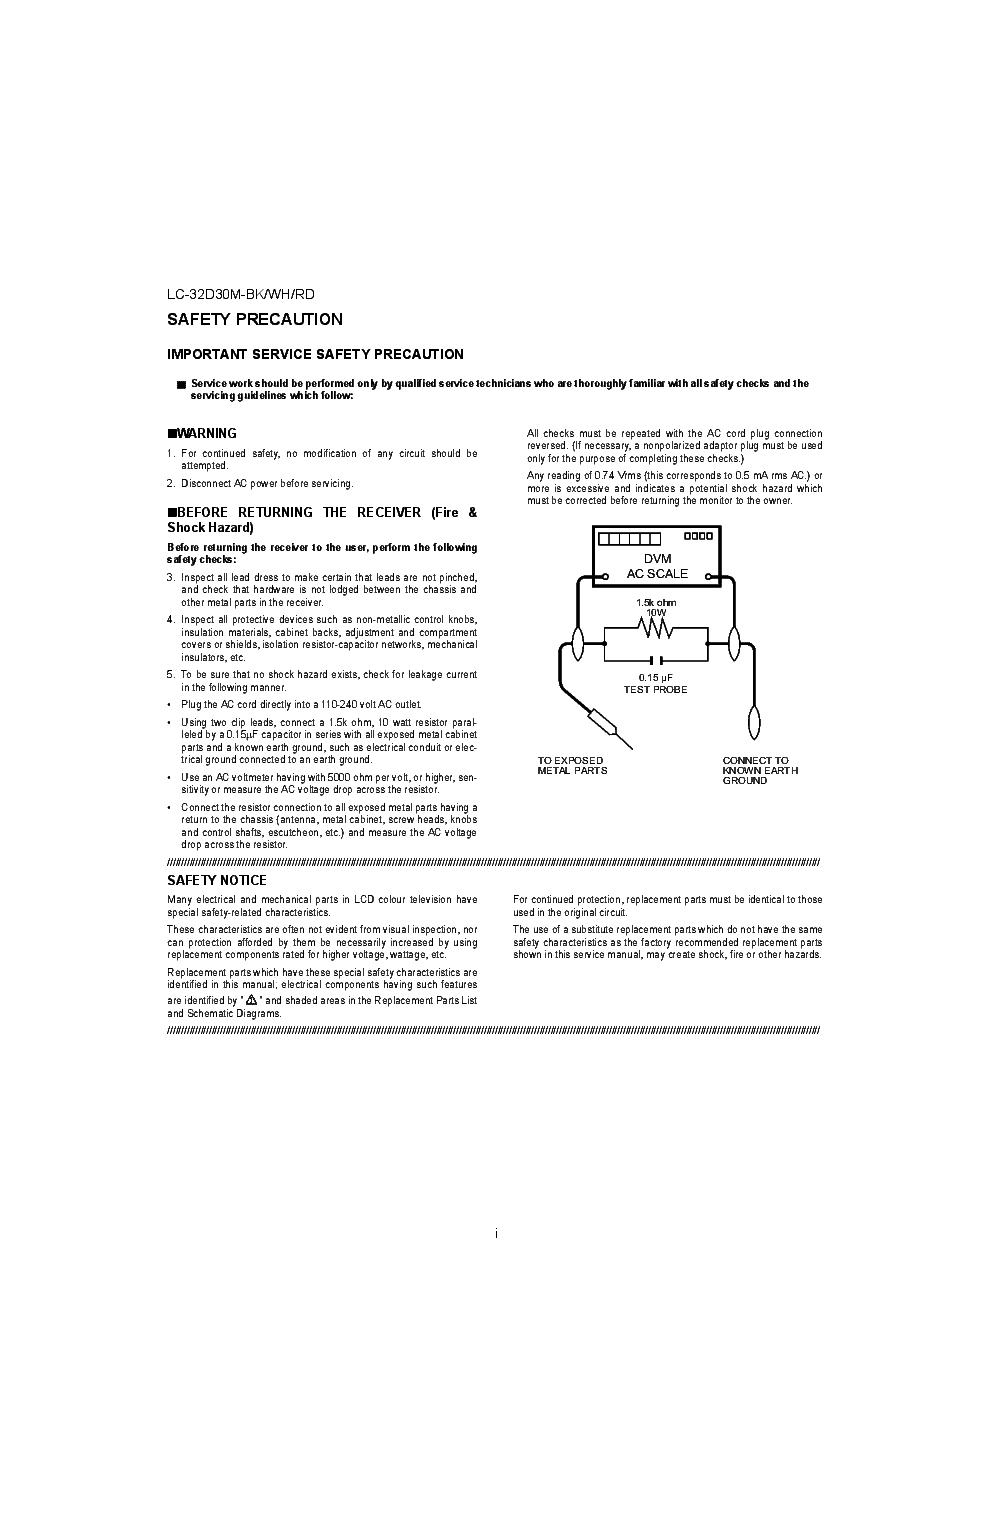 SHARP LC-32D30M-BK WH RD SM service manual (2nd page)